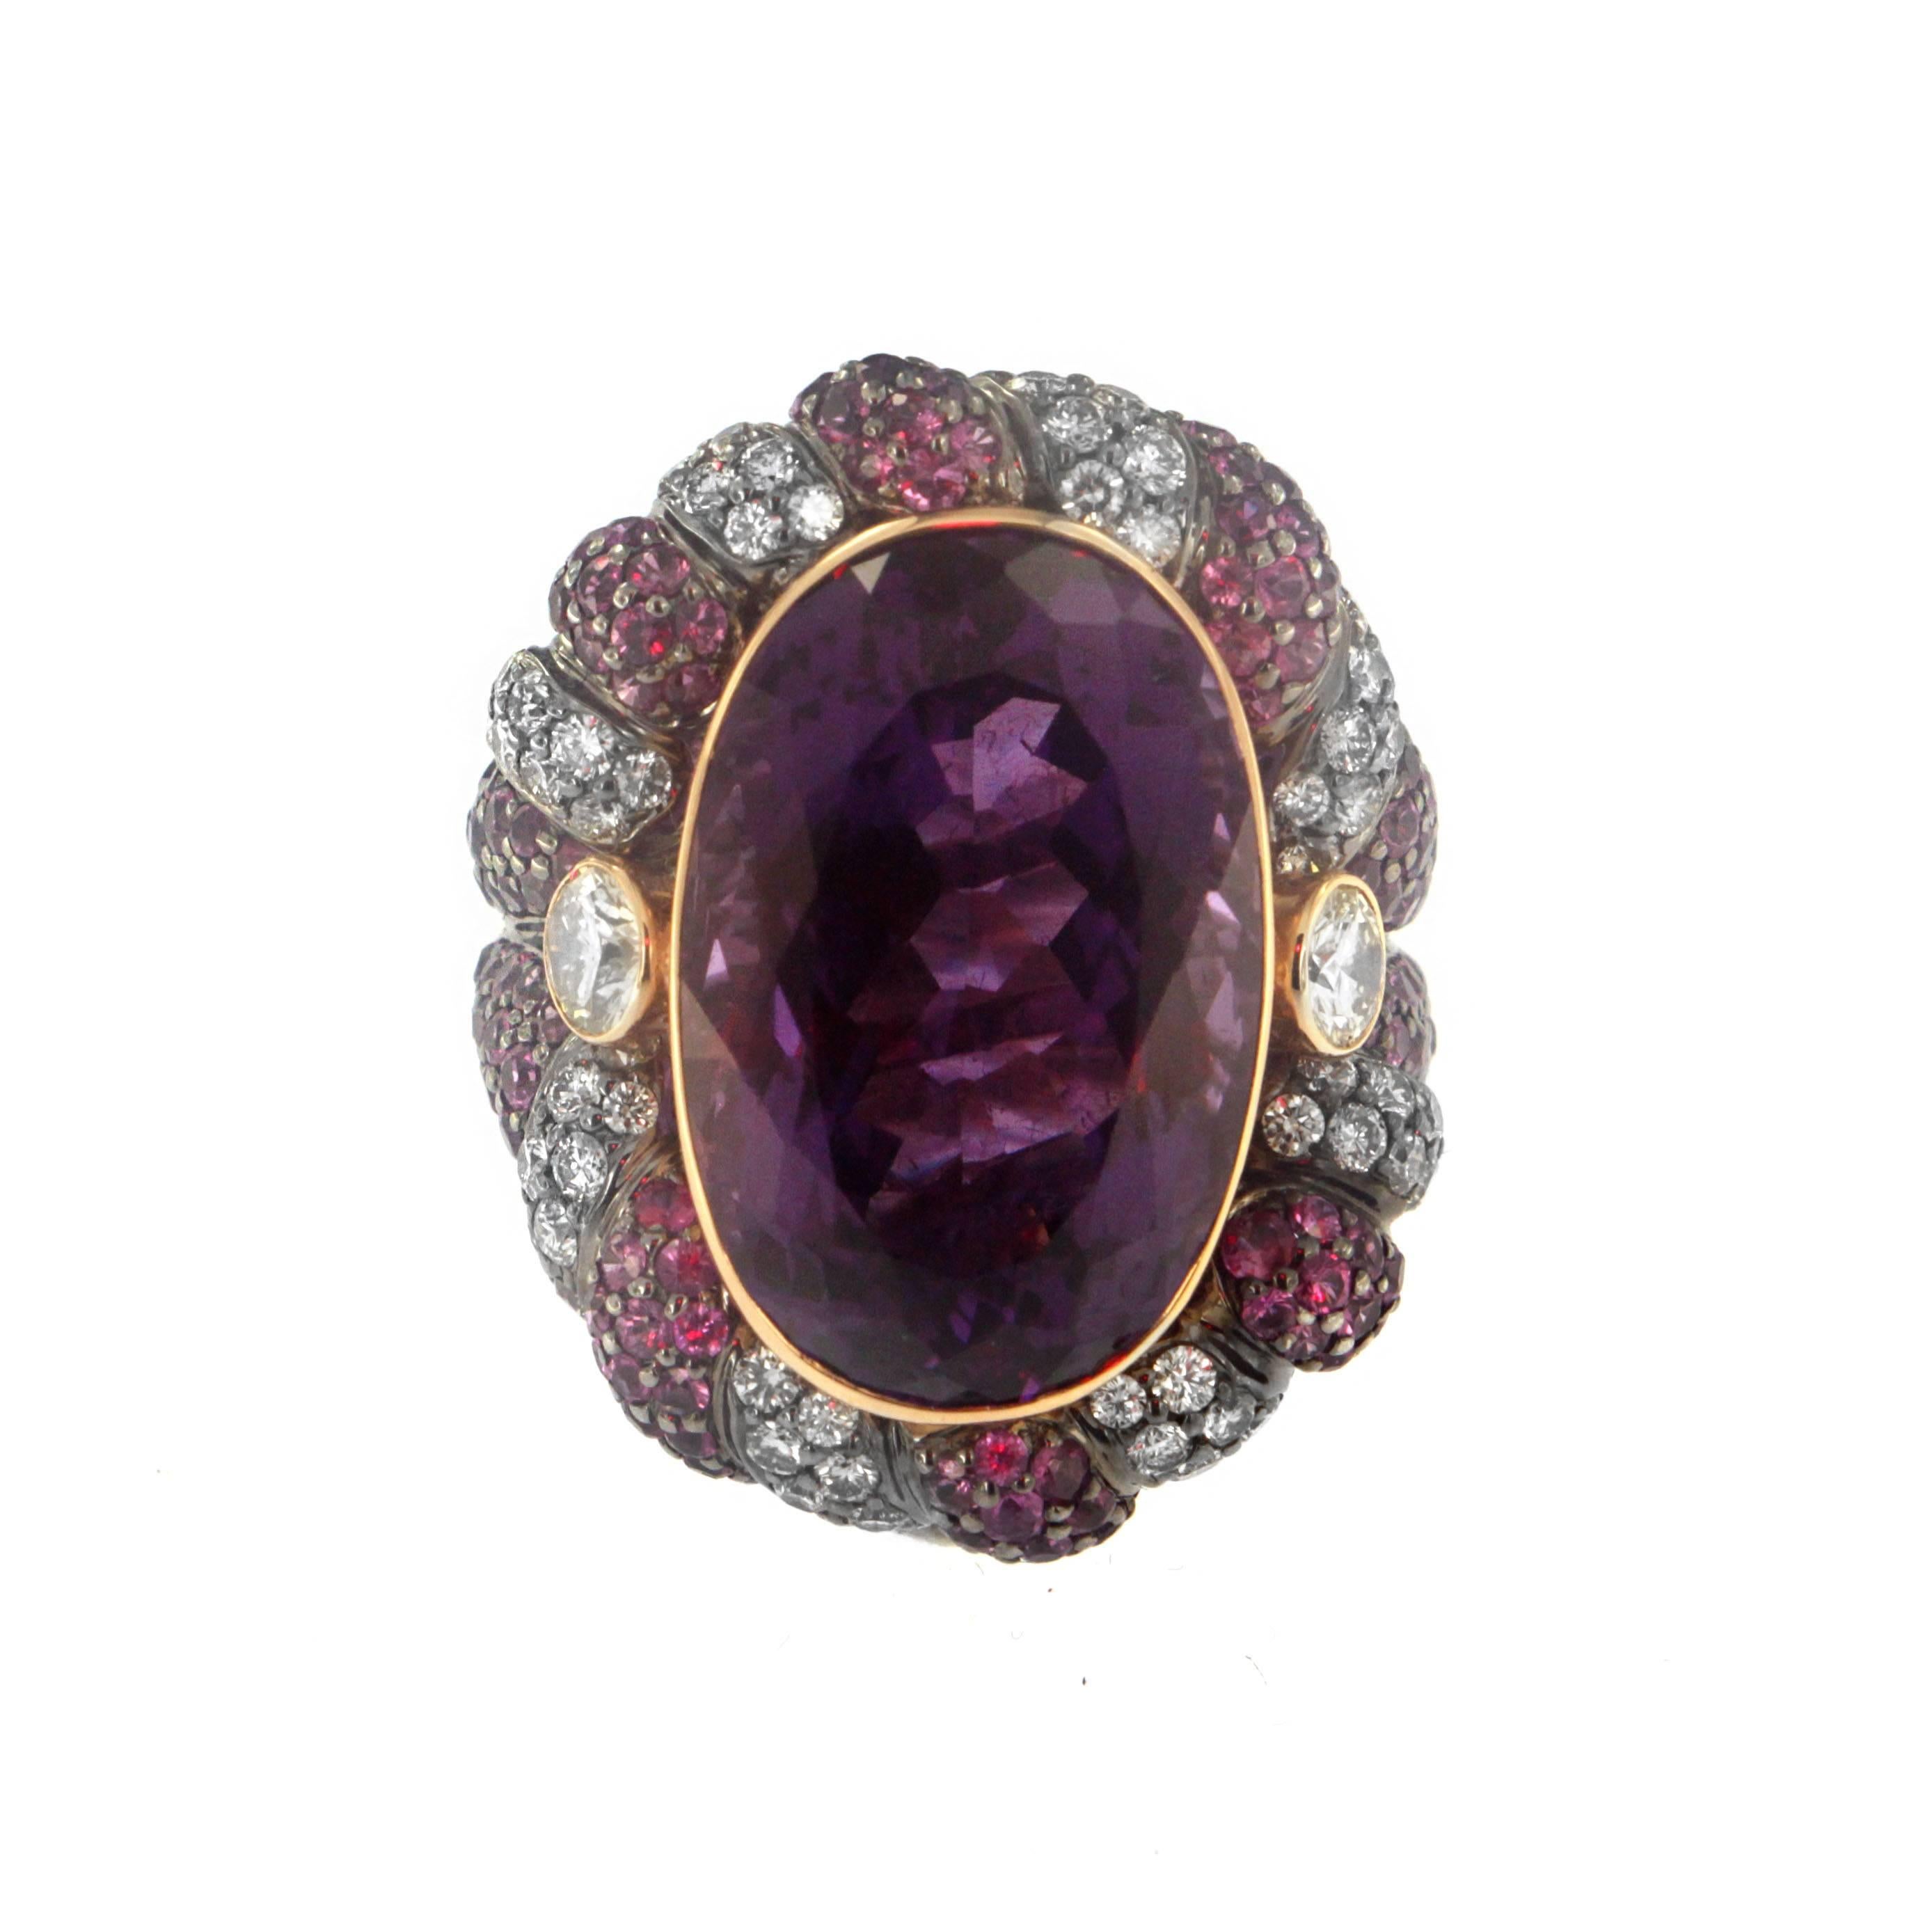 Raise a glass to 19.89 Carats of Amethyst Quartz faceted into this magnificent jewel as the center stone for Zorab's glamorous cocktail ring.  Rimmed Pinks Sapphires (2.81 CT),  White Diamonds (1.77 CT) and set on 18 Karat Gold and Palladium, this